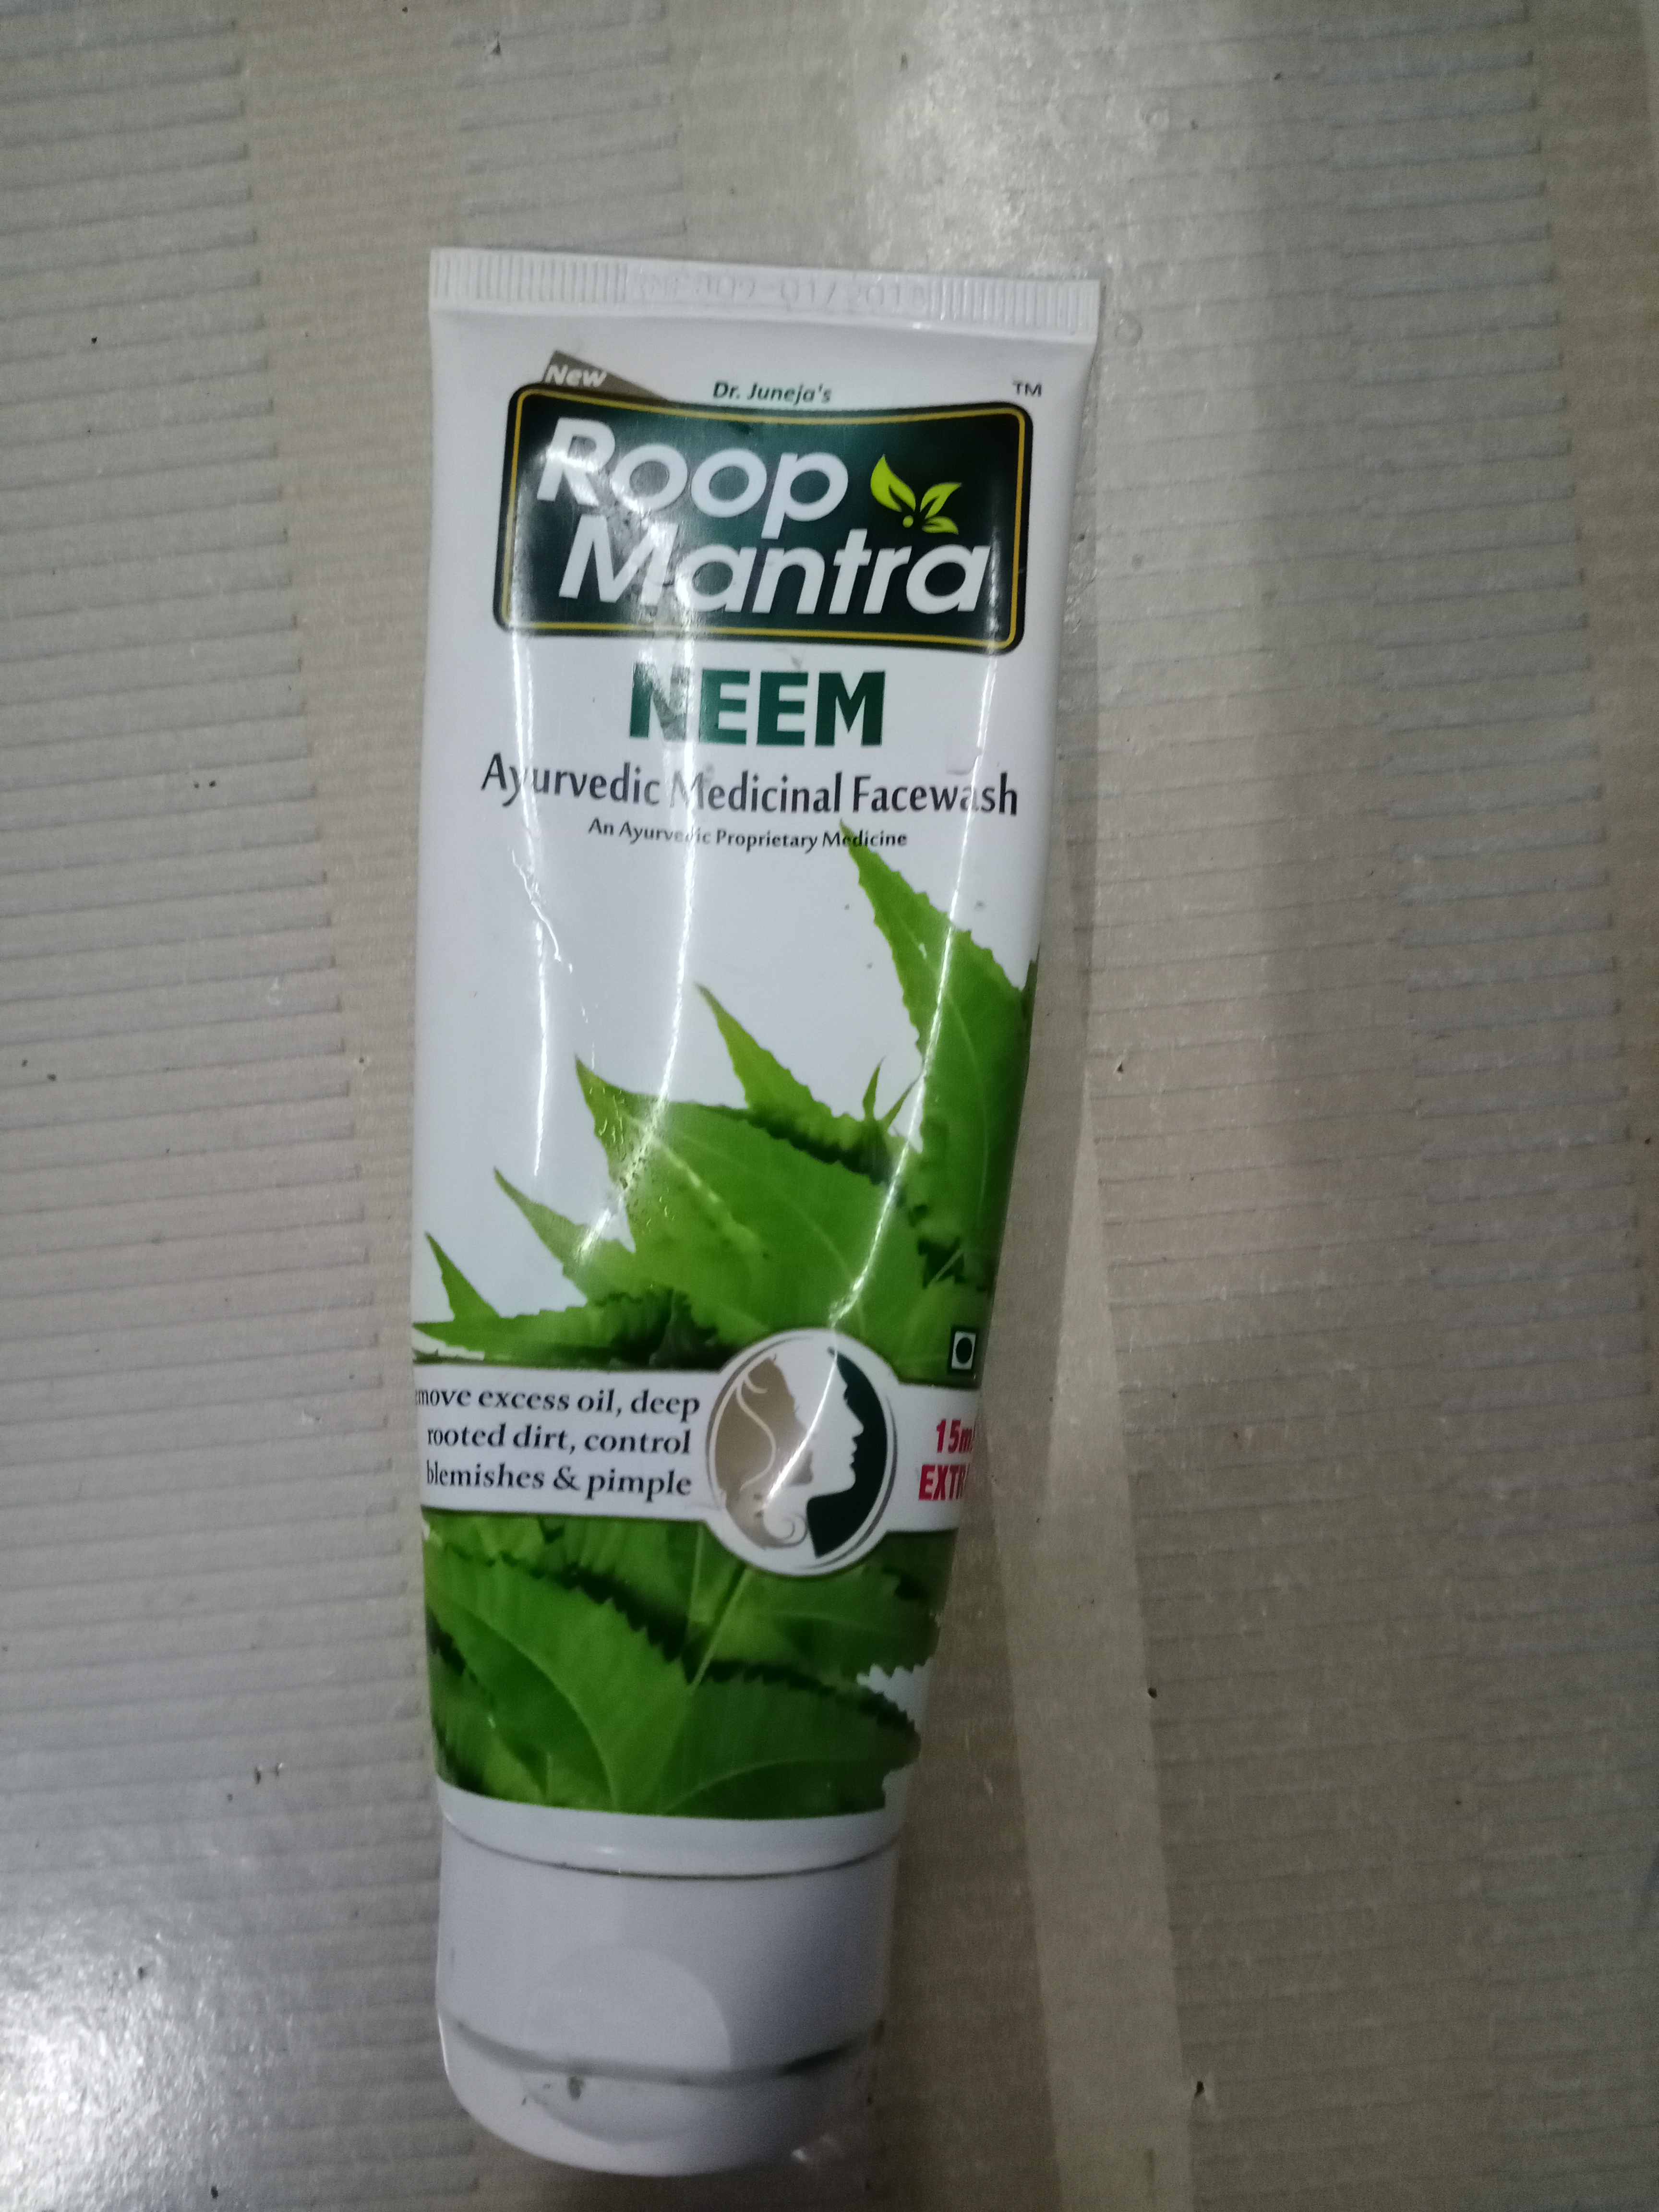 Roop Mantra Neem Face Wash Reviews, Ingredients, Benefits, How To Use, Price